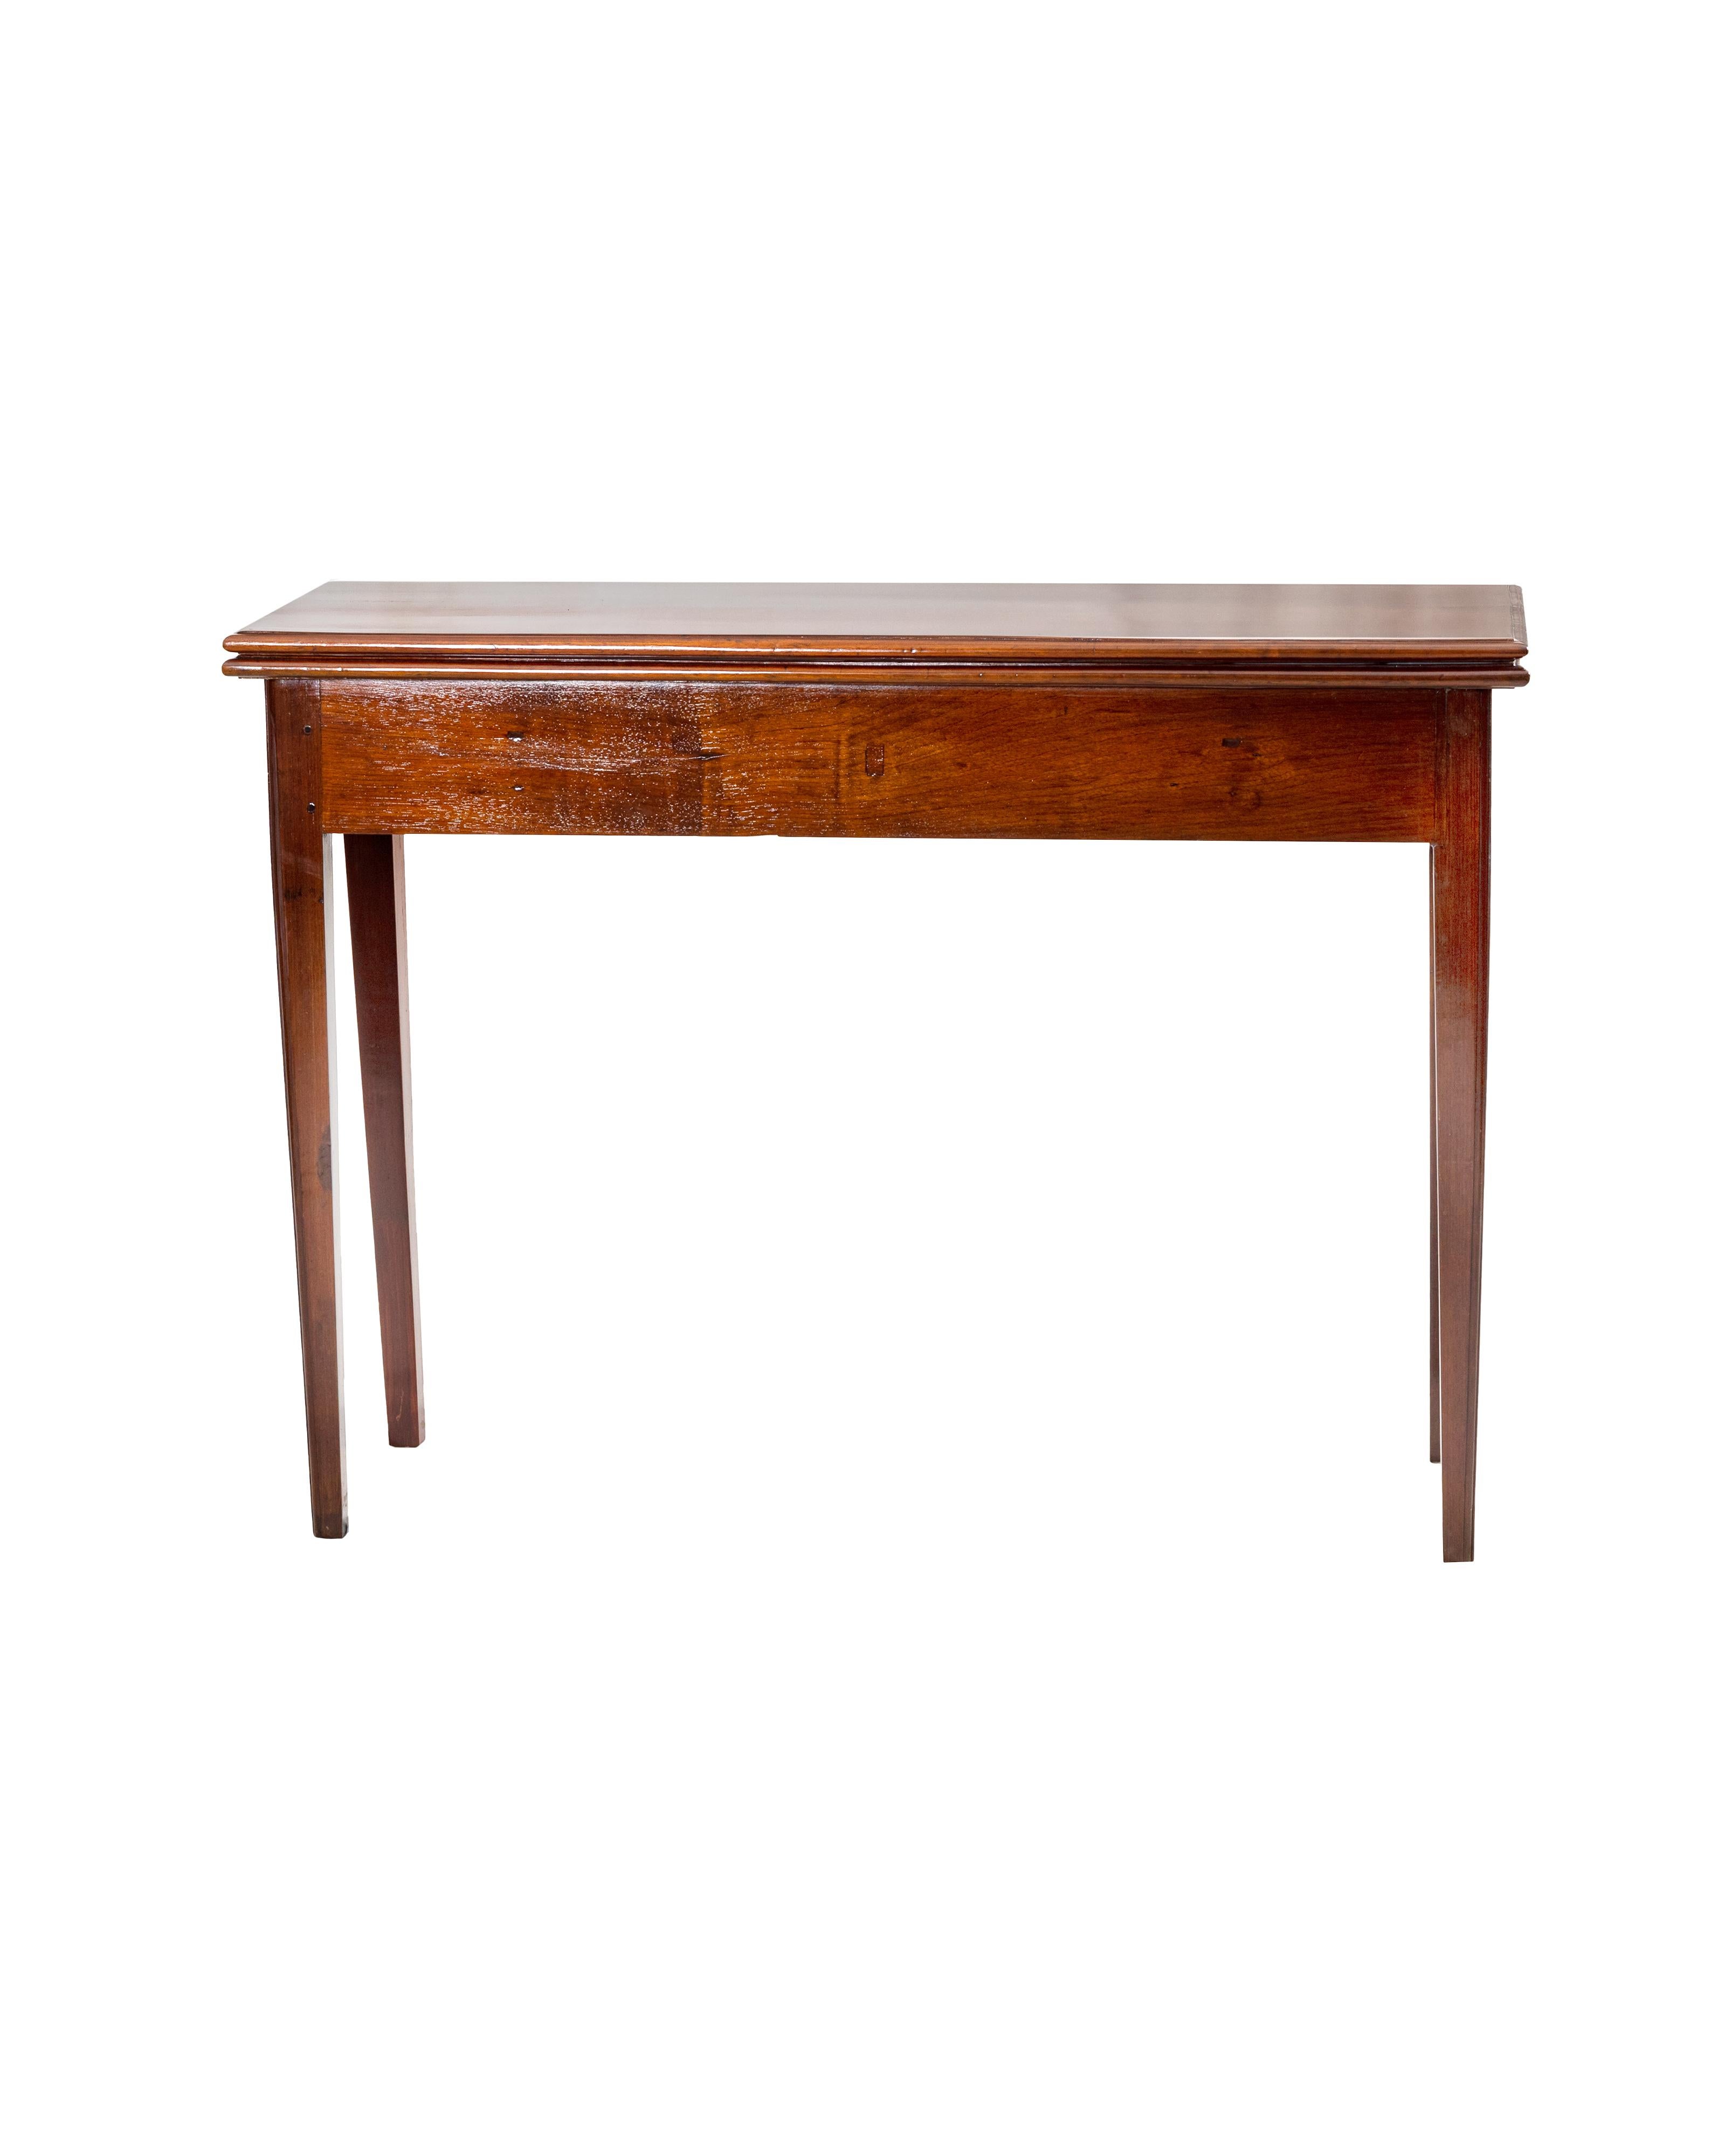 A George III styled portuguese drop leaf table from the 19th Century with 5 legs that doubles the depth surface space if needed with a support leg in excellent condition.